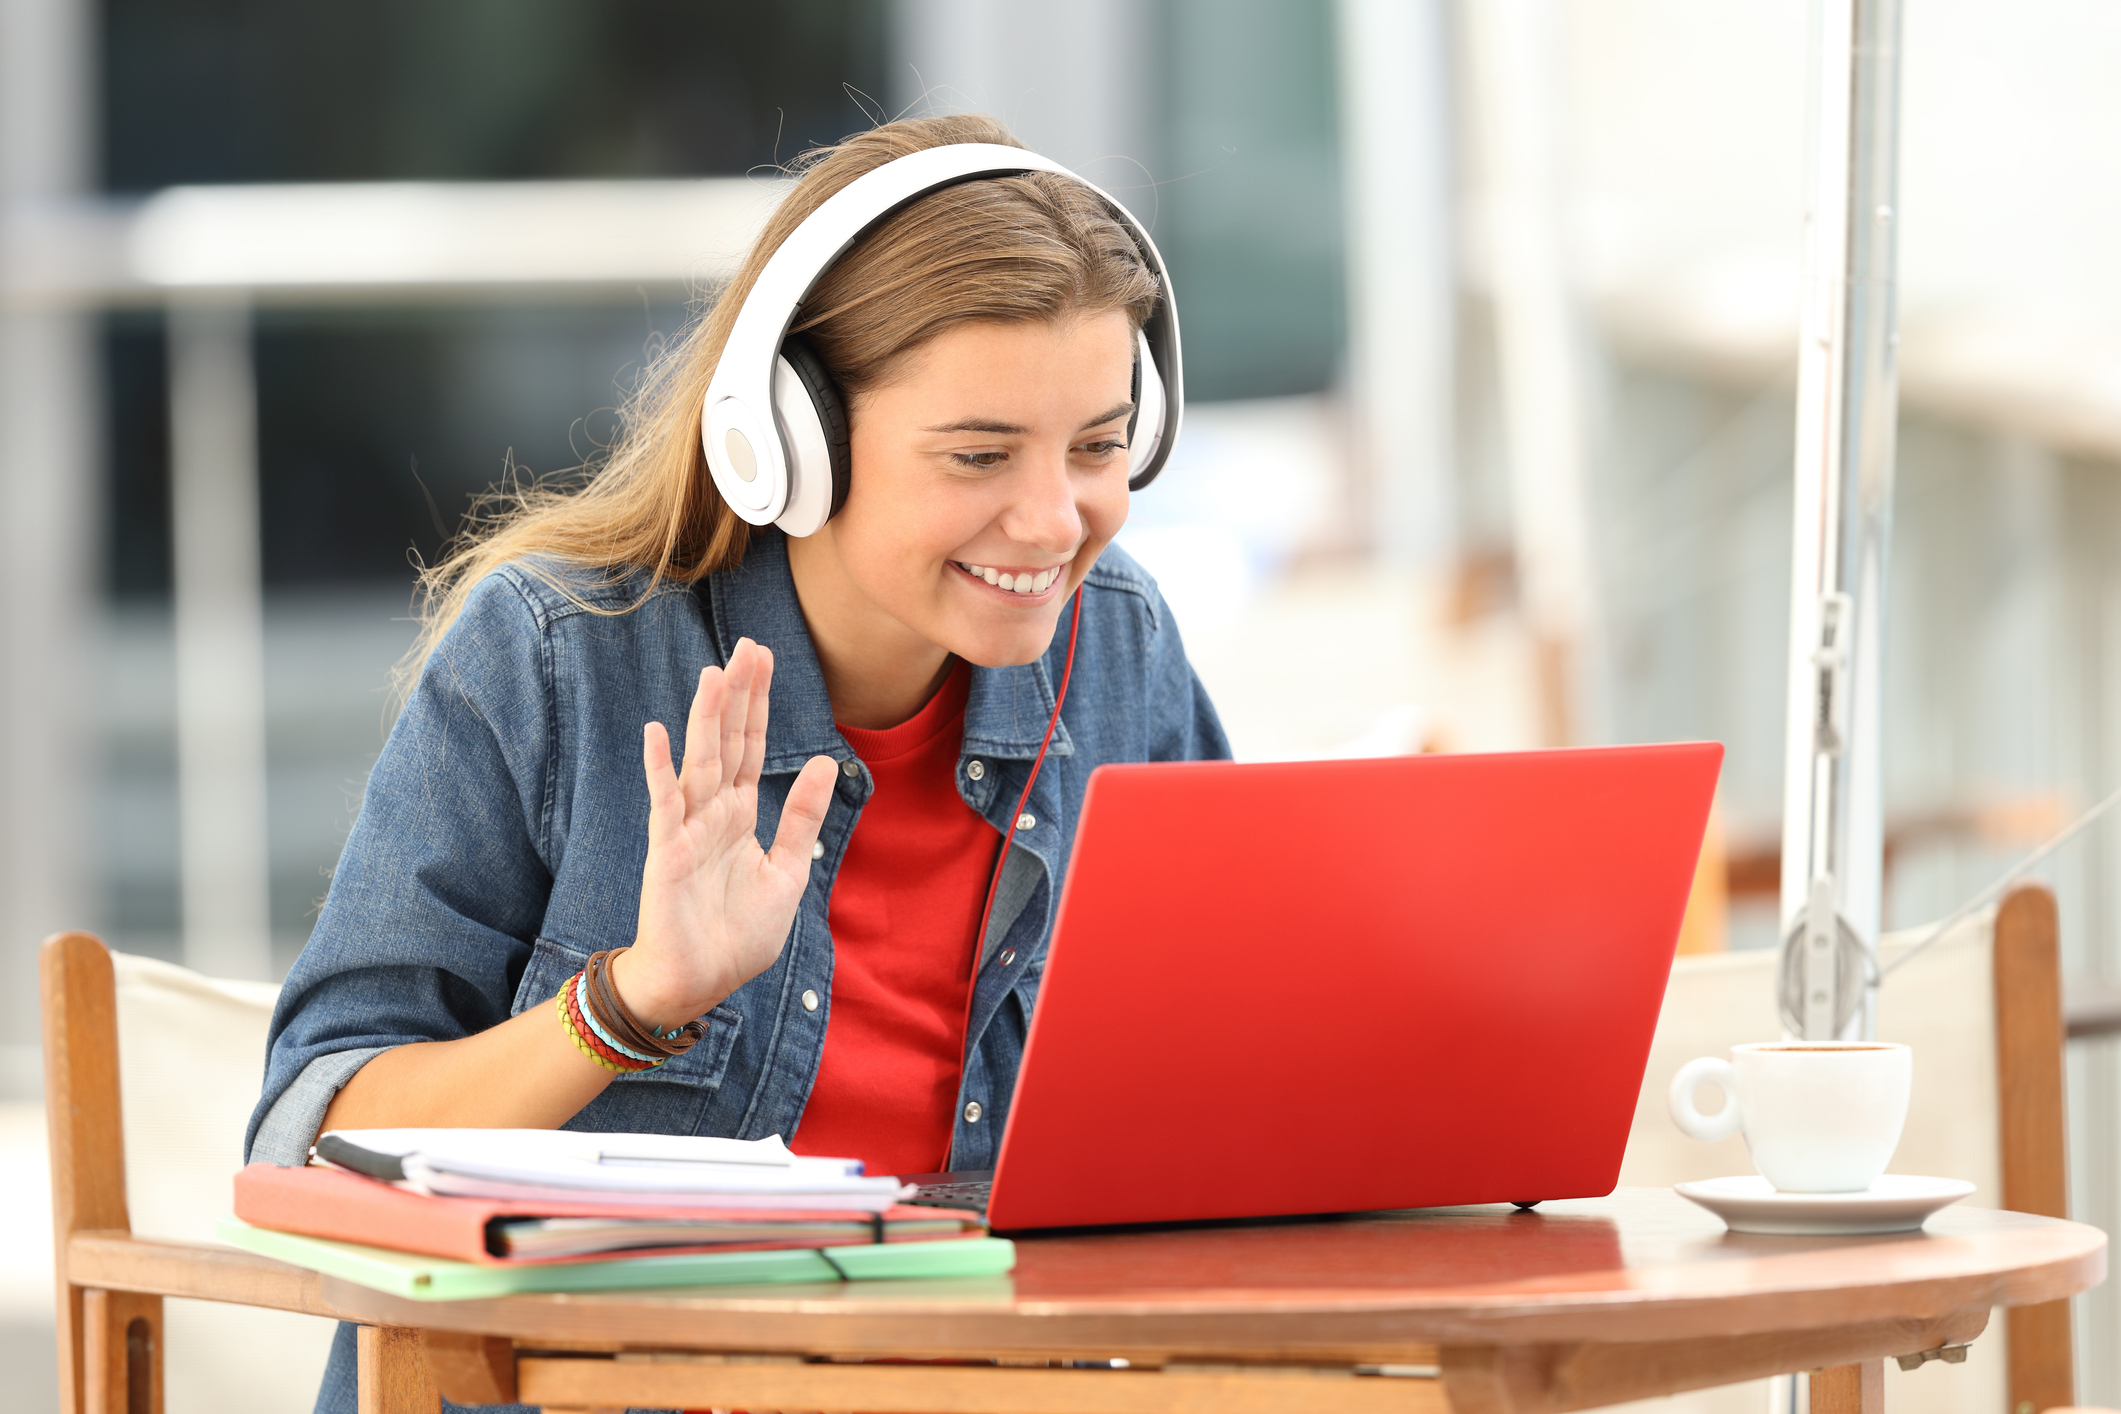 stock photo of a white female college student on a zoom call using her laptop